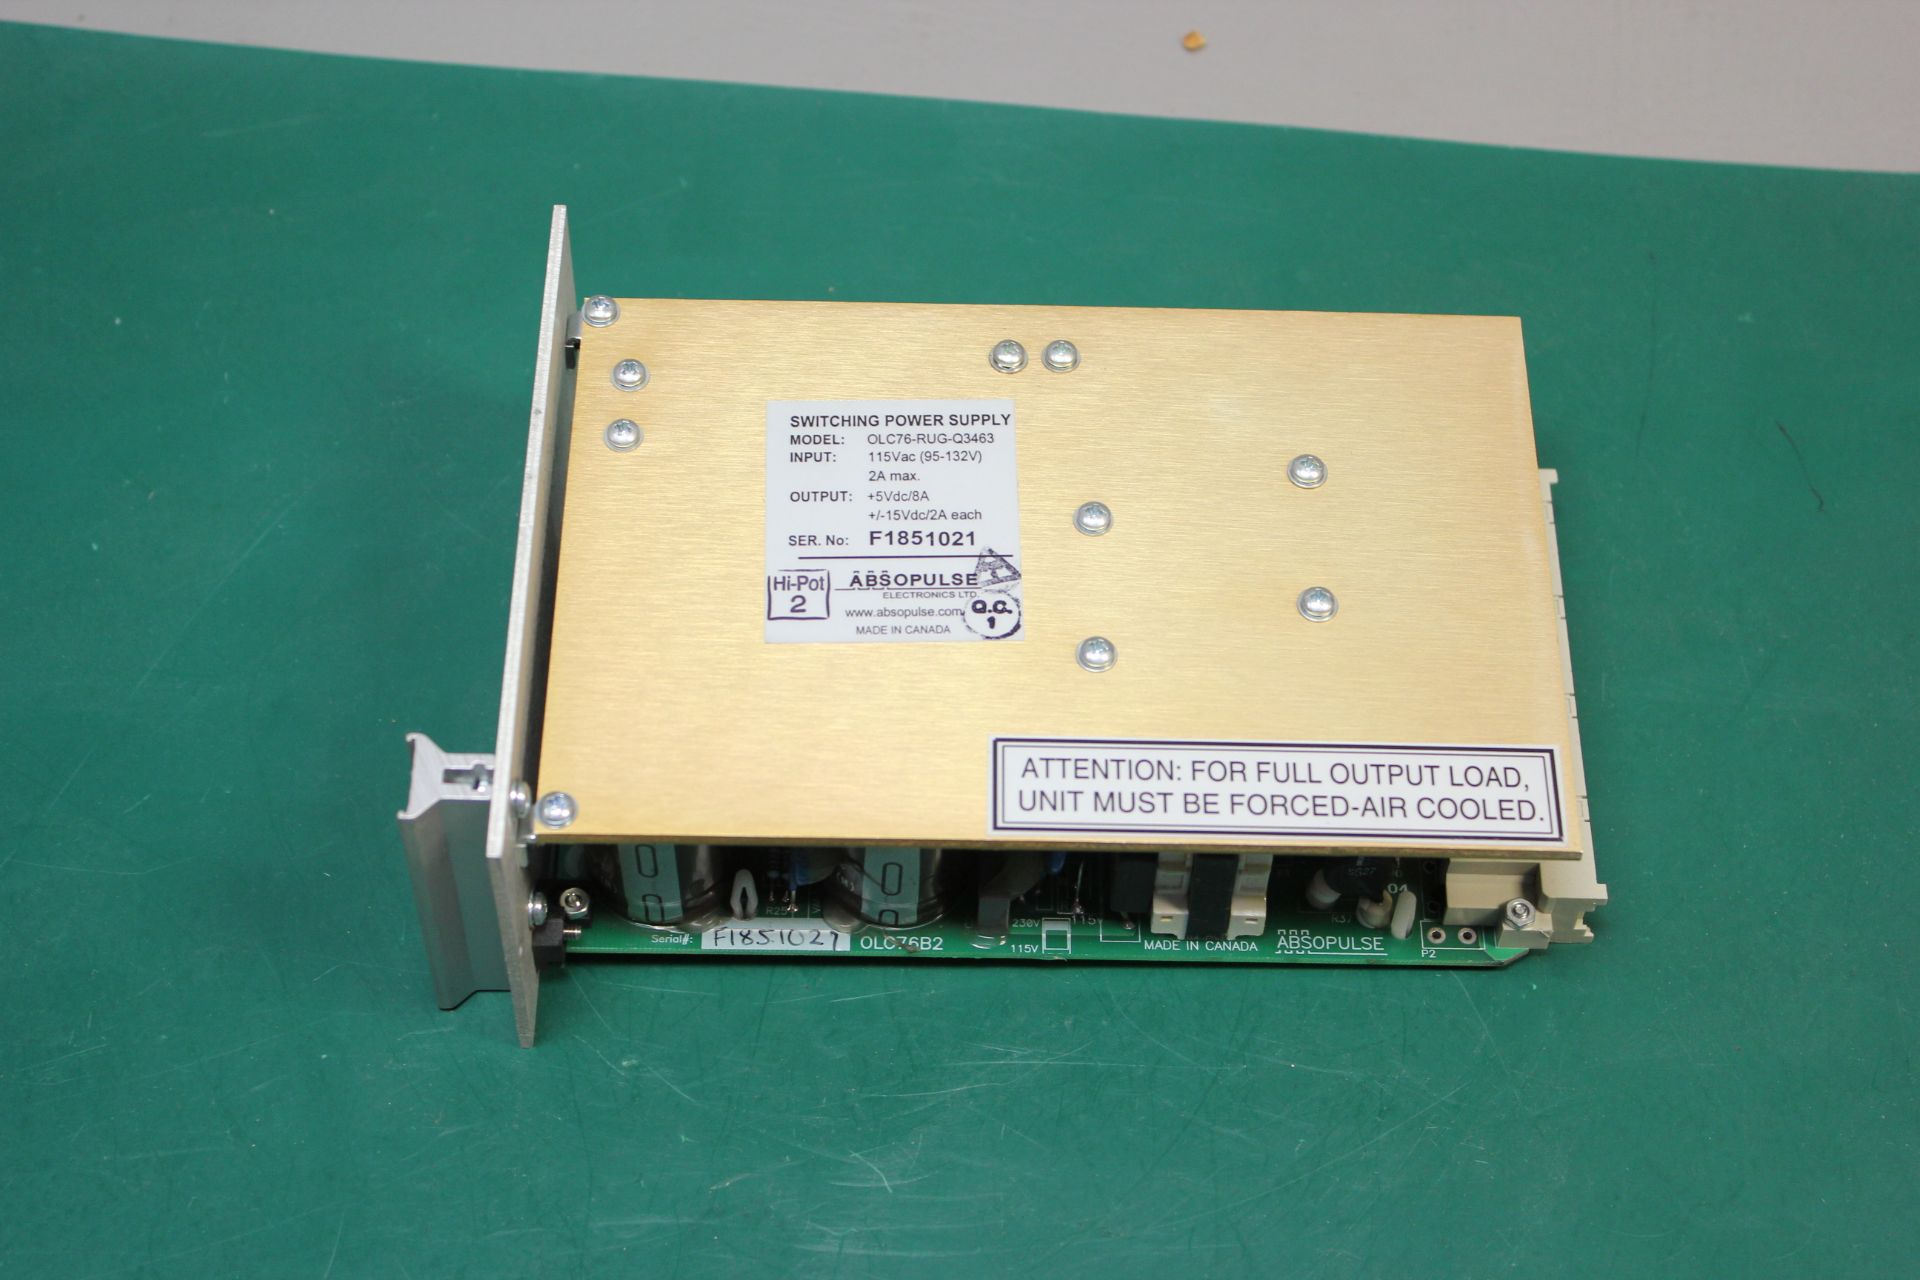 ABSOPULSE SWITCHING POWER SUPPLY